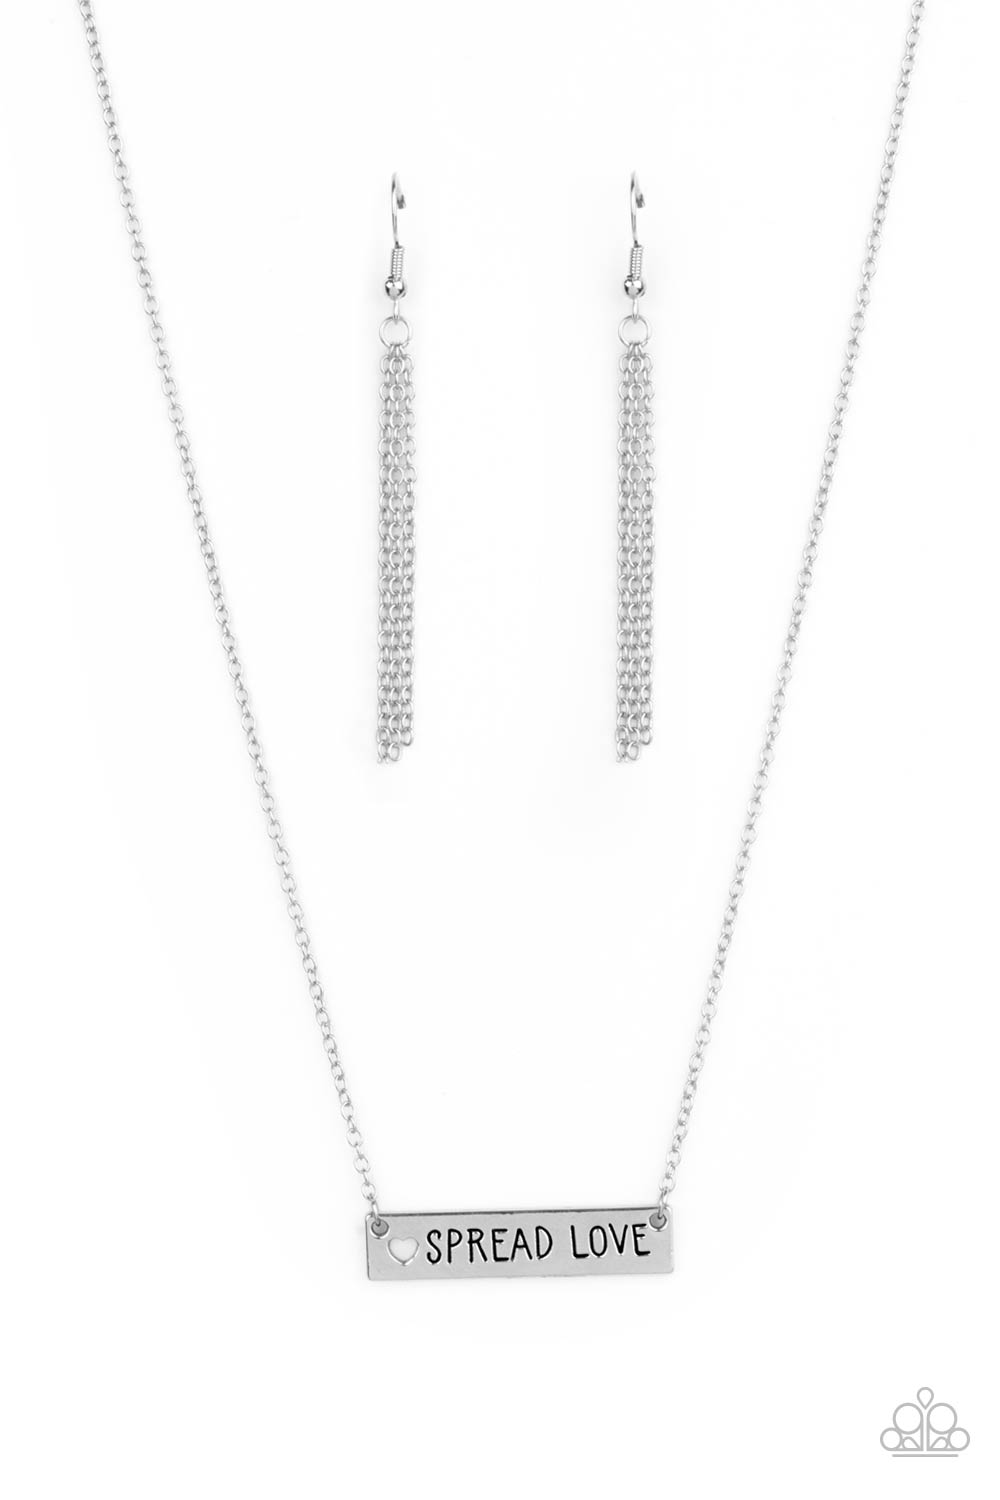 Spread Love - Silver inspirational necklace